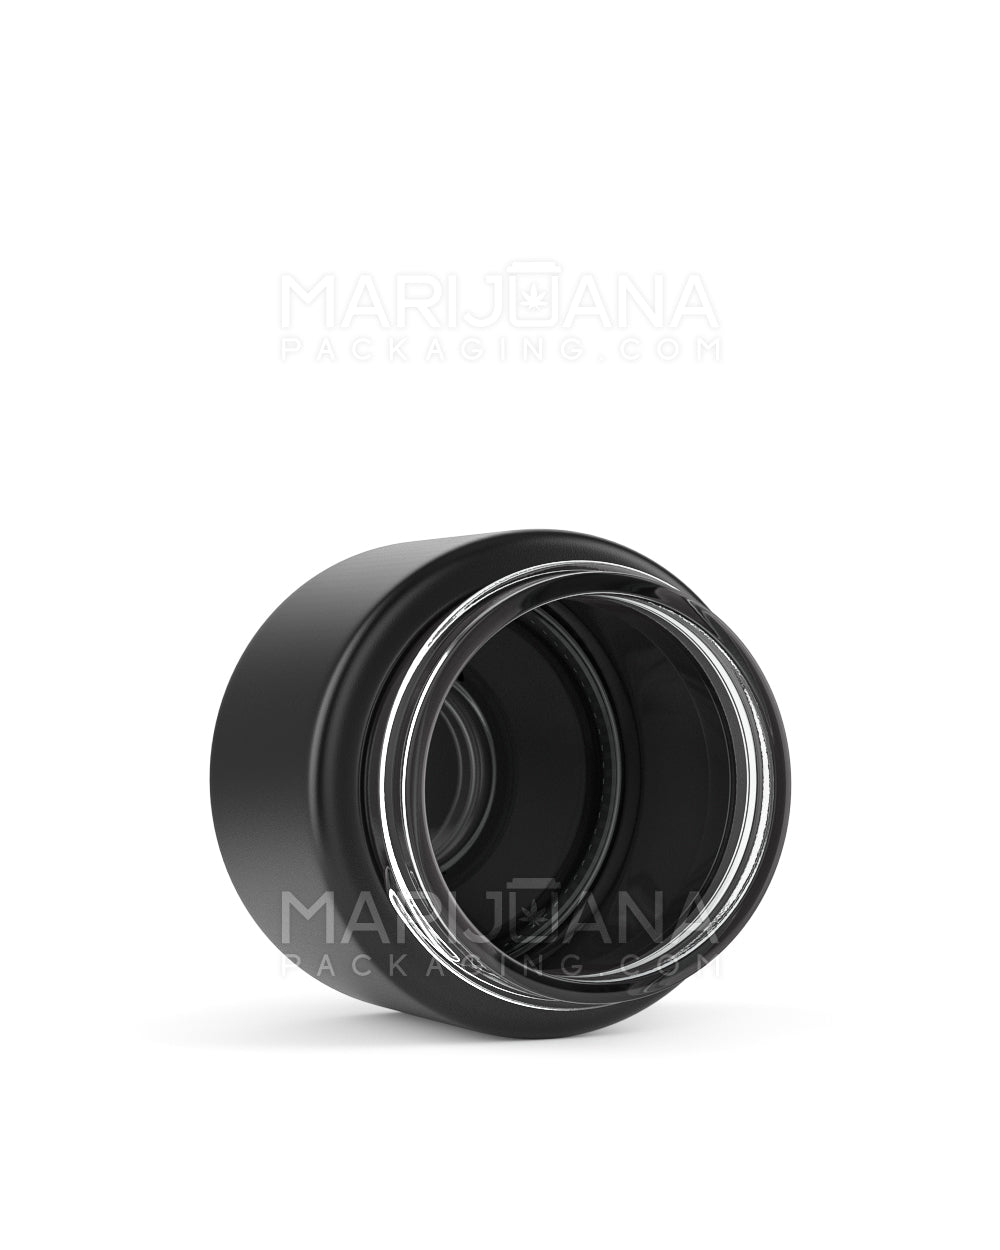 Straight Sided Matte Black Glass Jars | 50mm - 2oz - 200 Count - 3